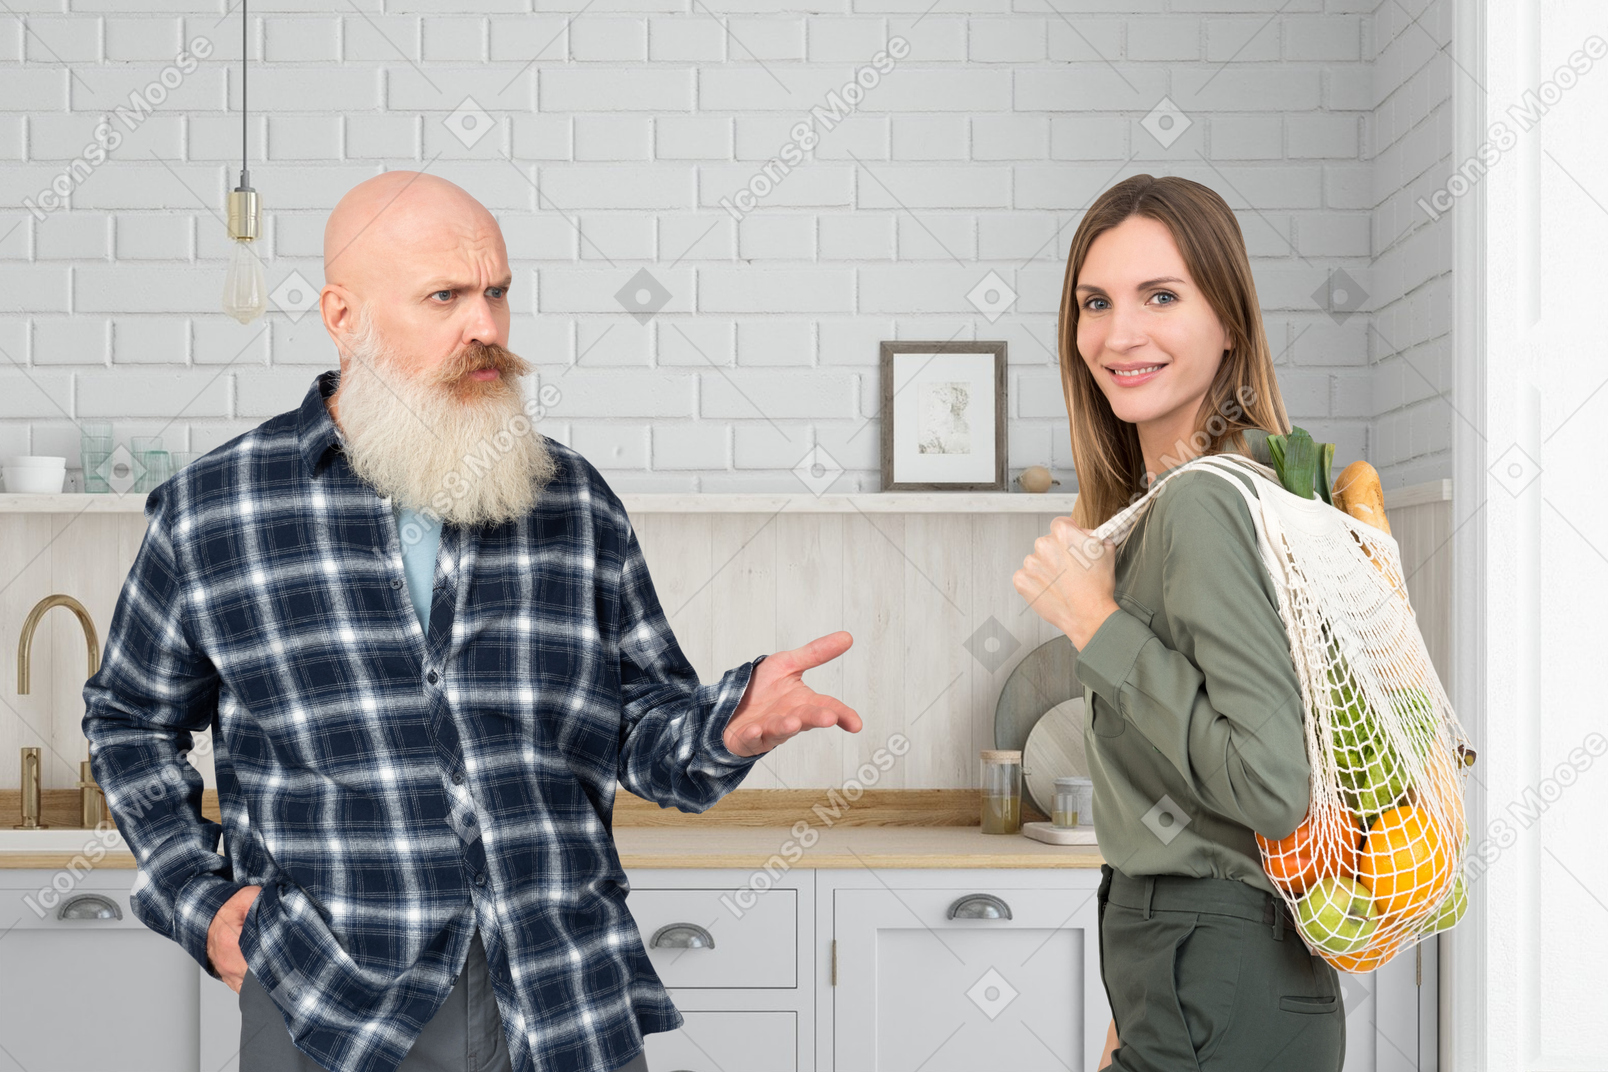 A man with a long white beard and a woman with a bag